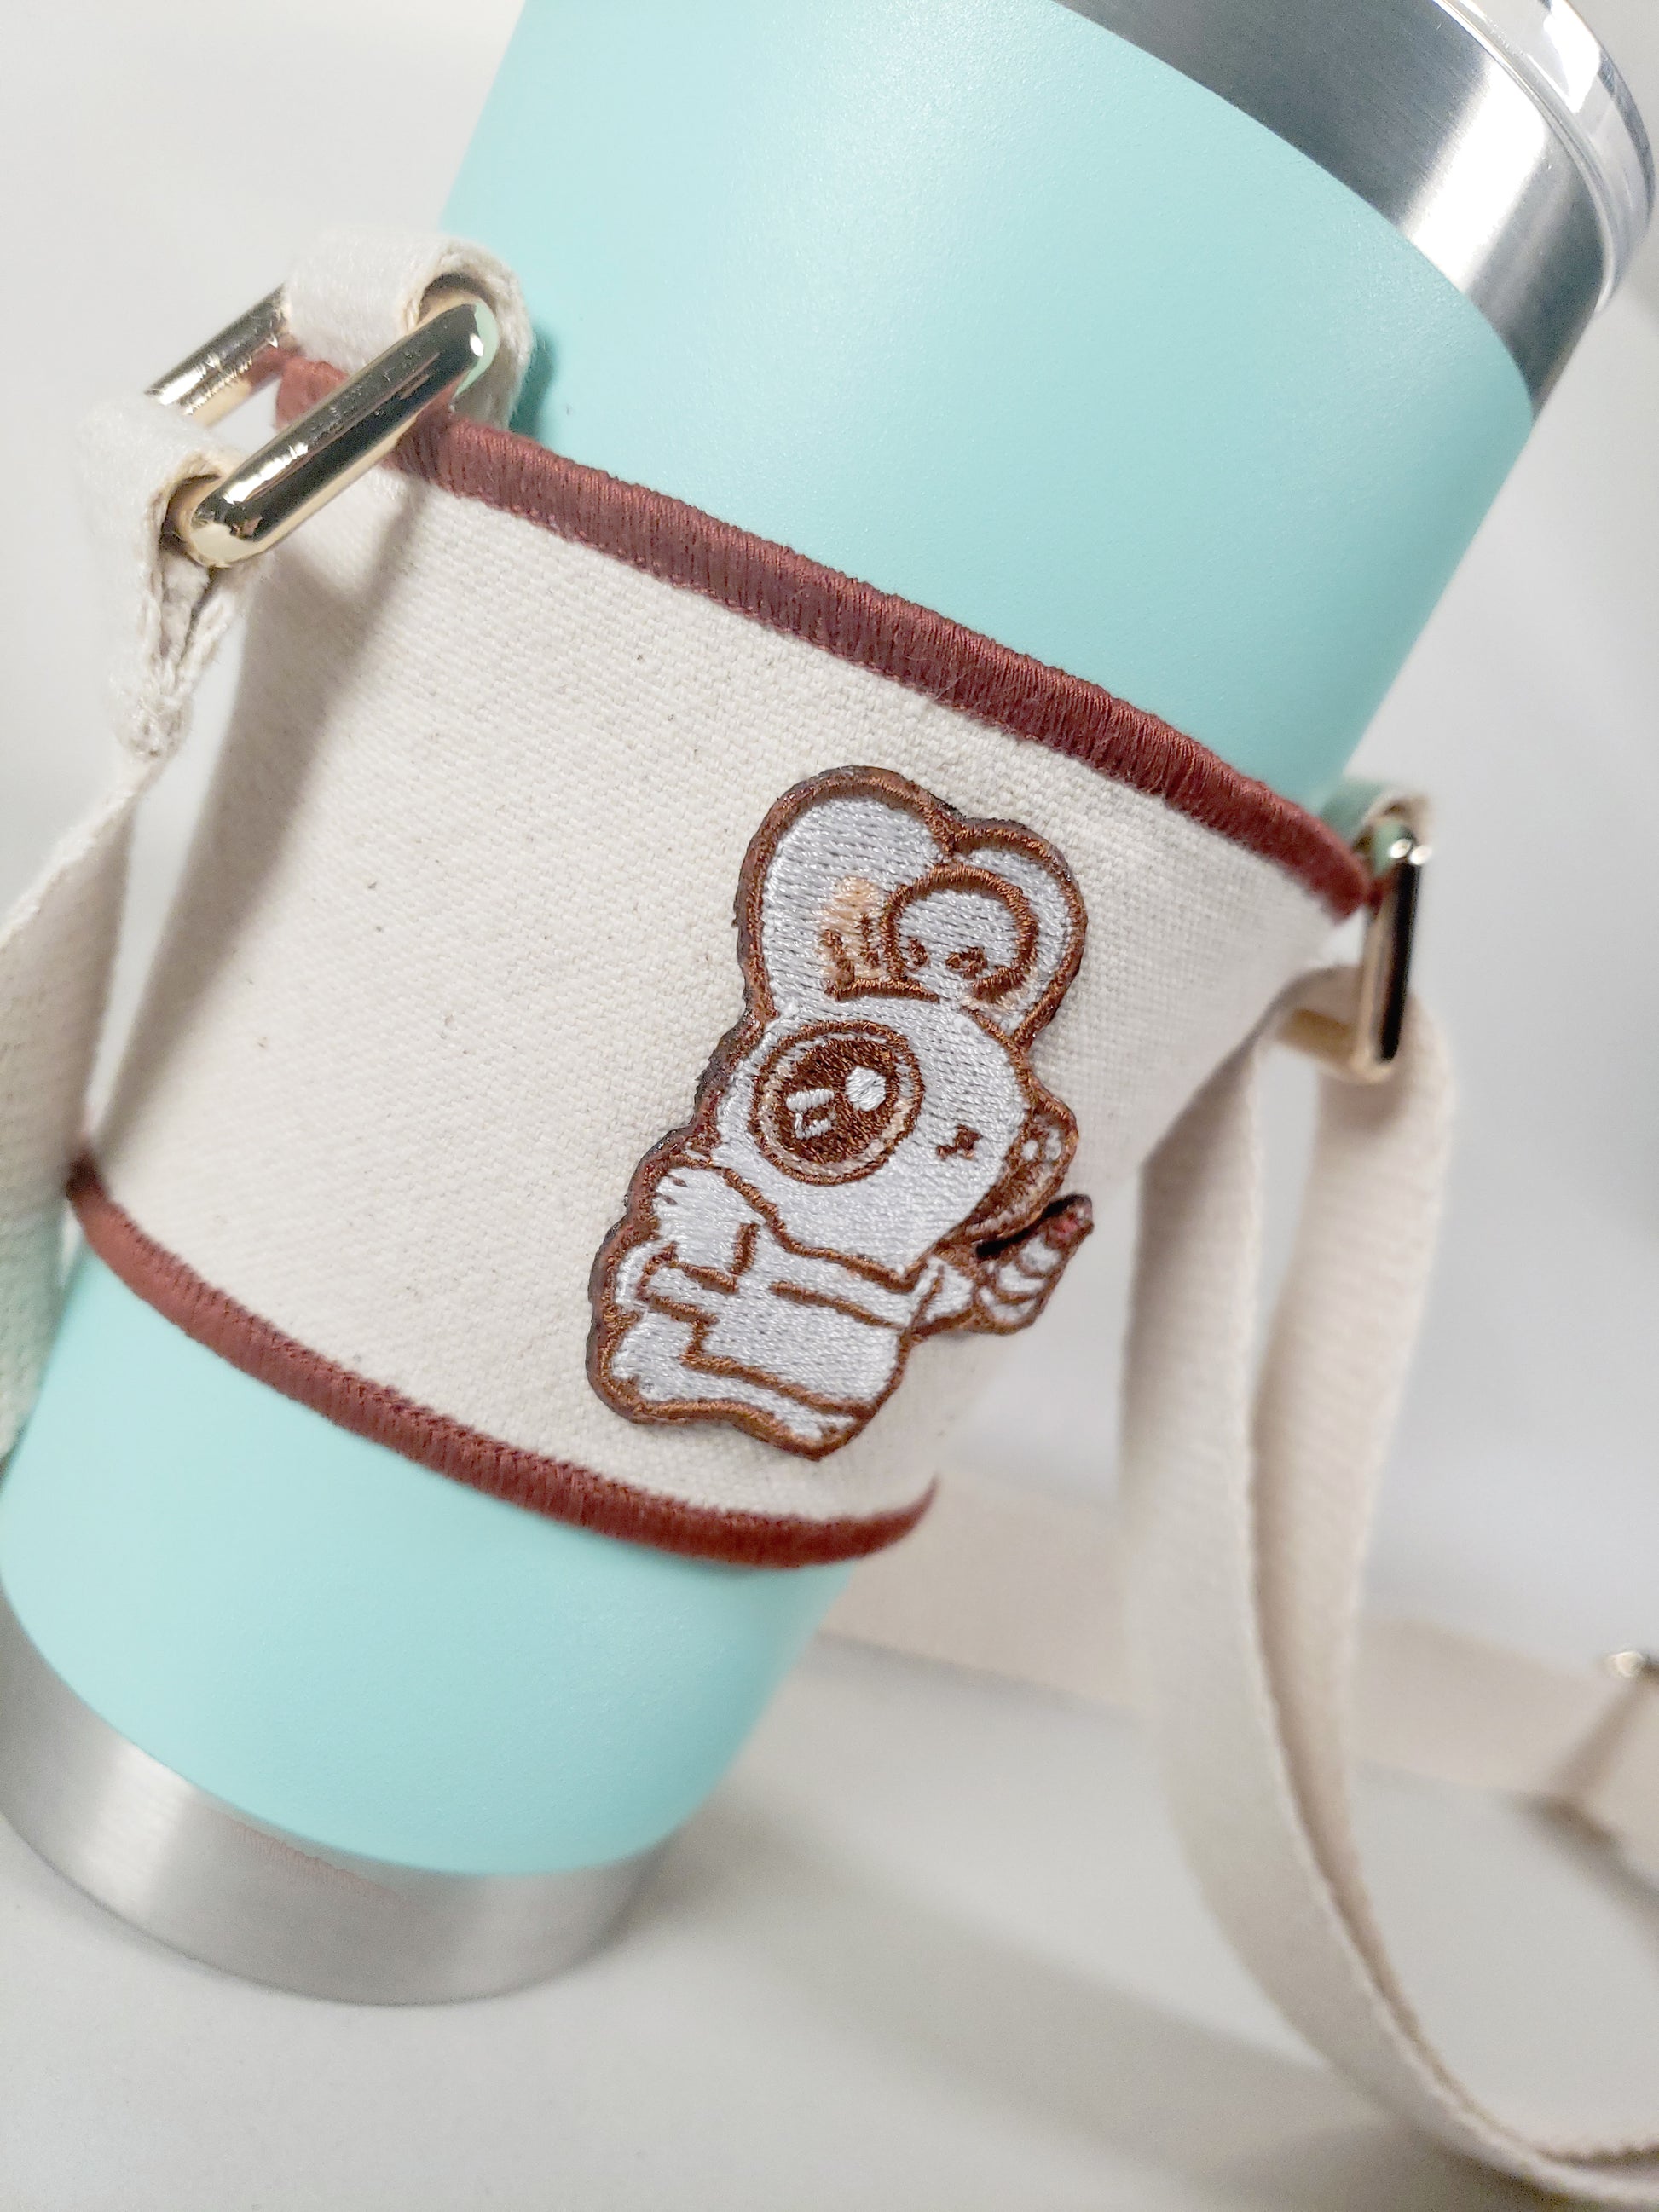 Linen color cloth cup holder with Baker Bunneh as an embroidered patch holding a mint green coffee tumbler.